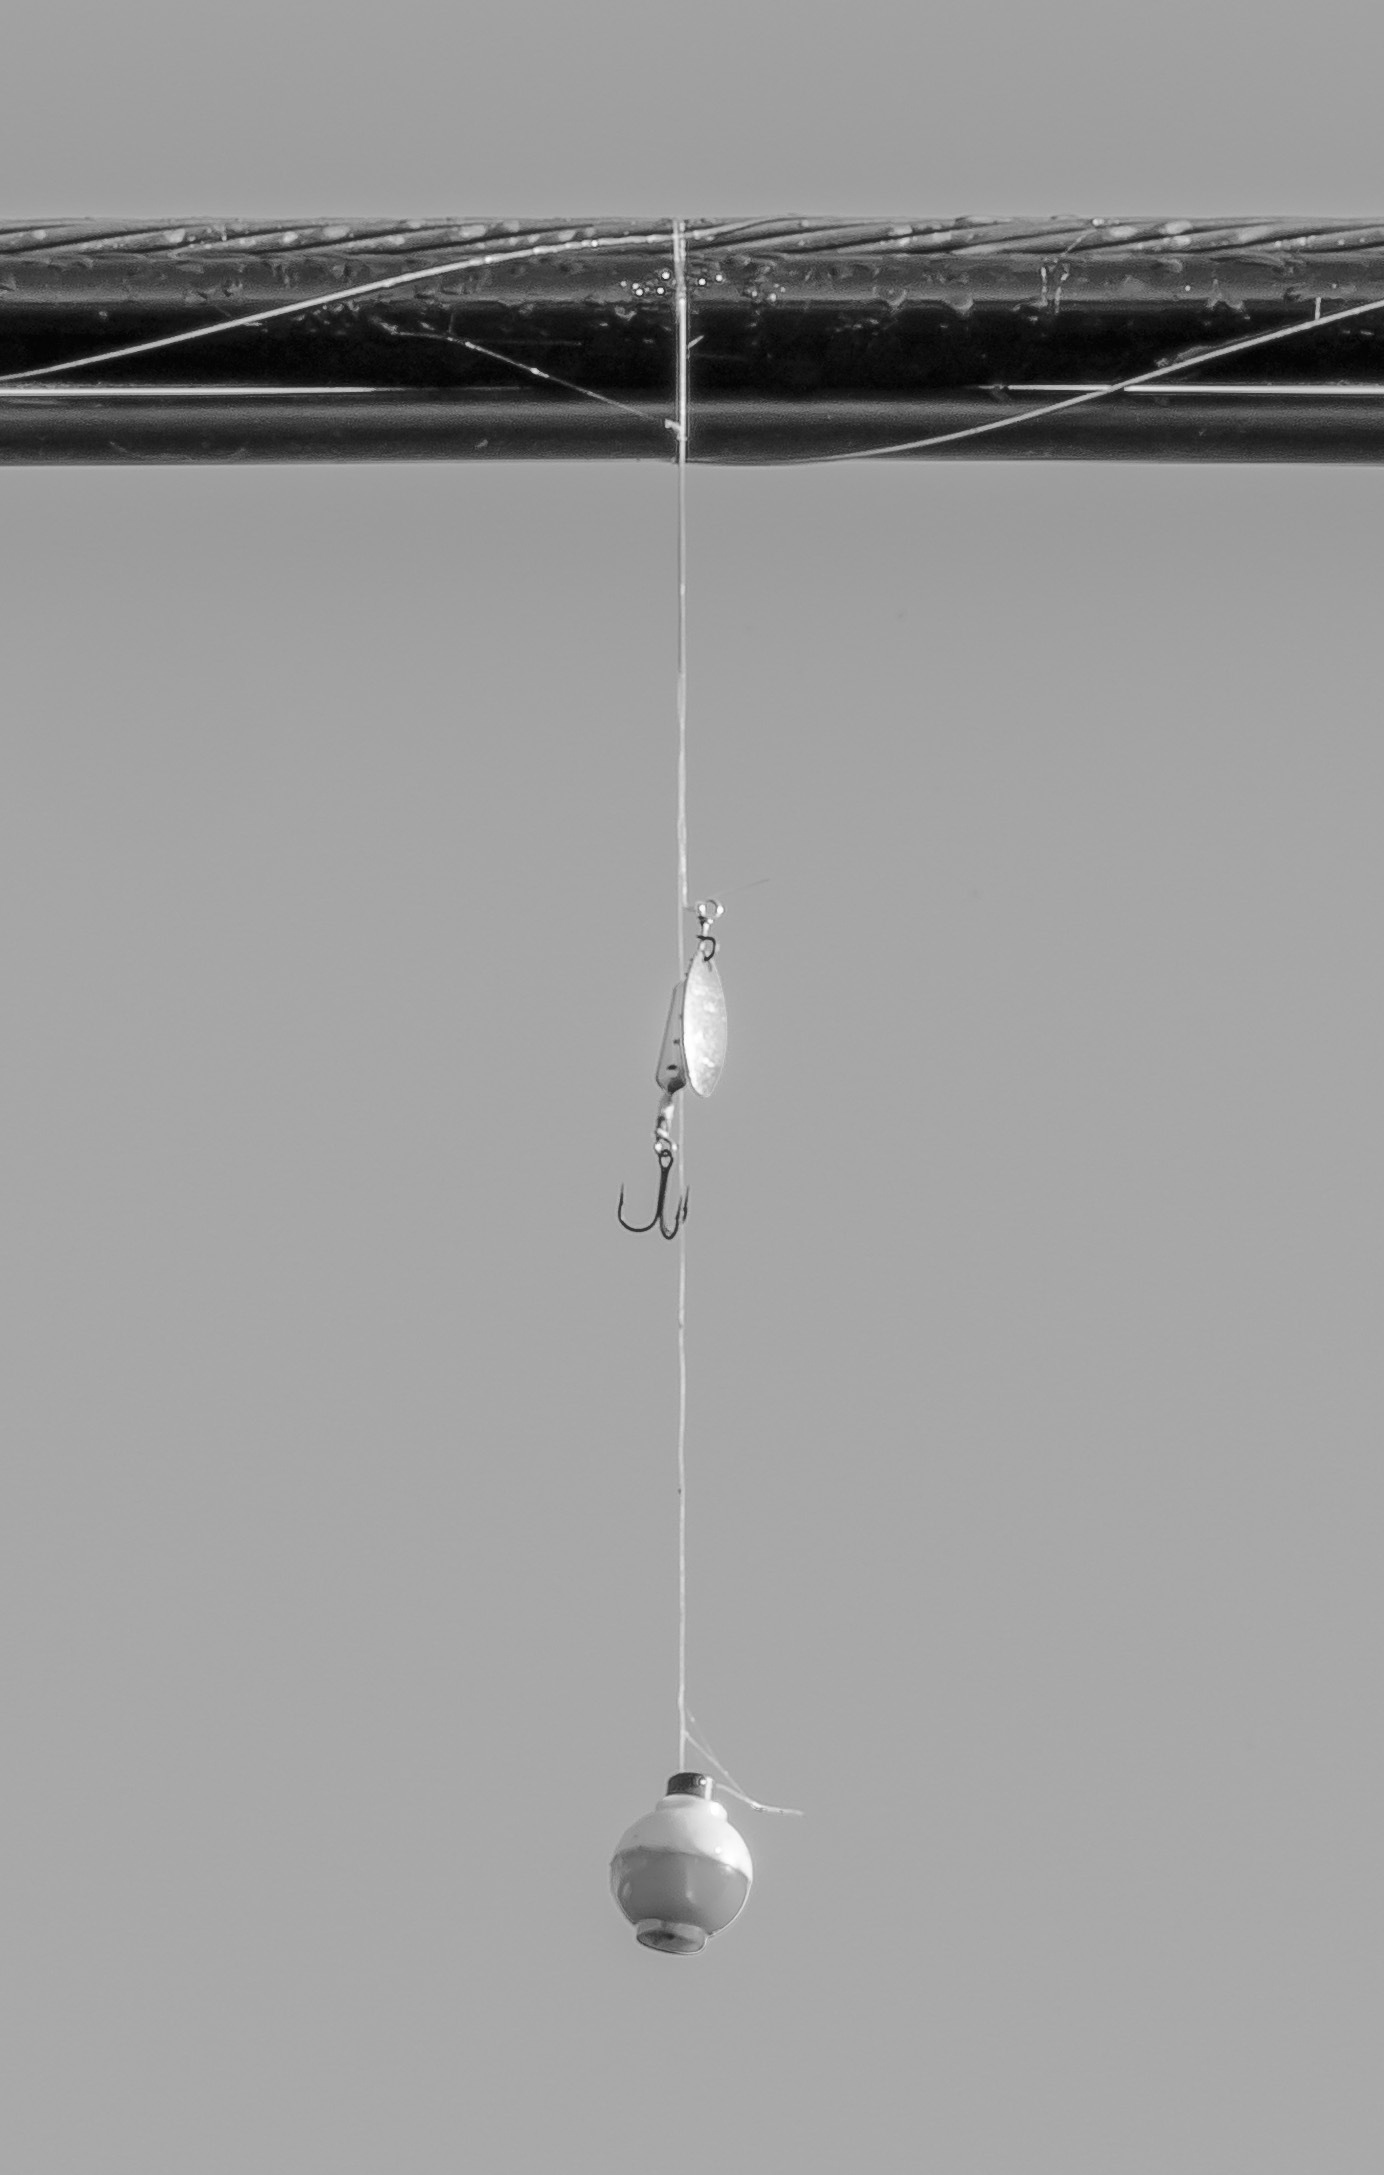 fishing lure and float hanging from utility line